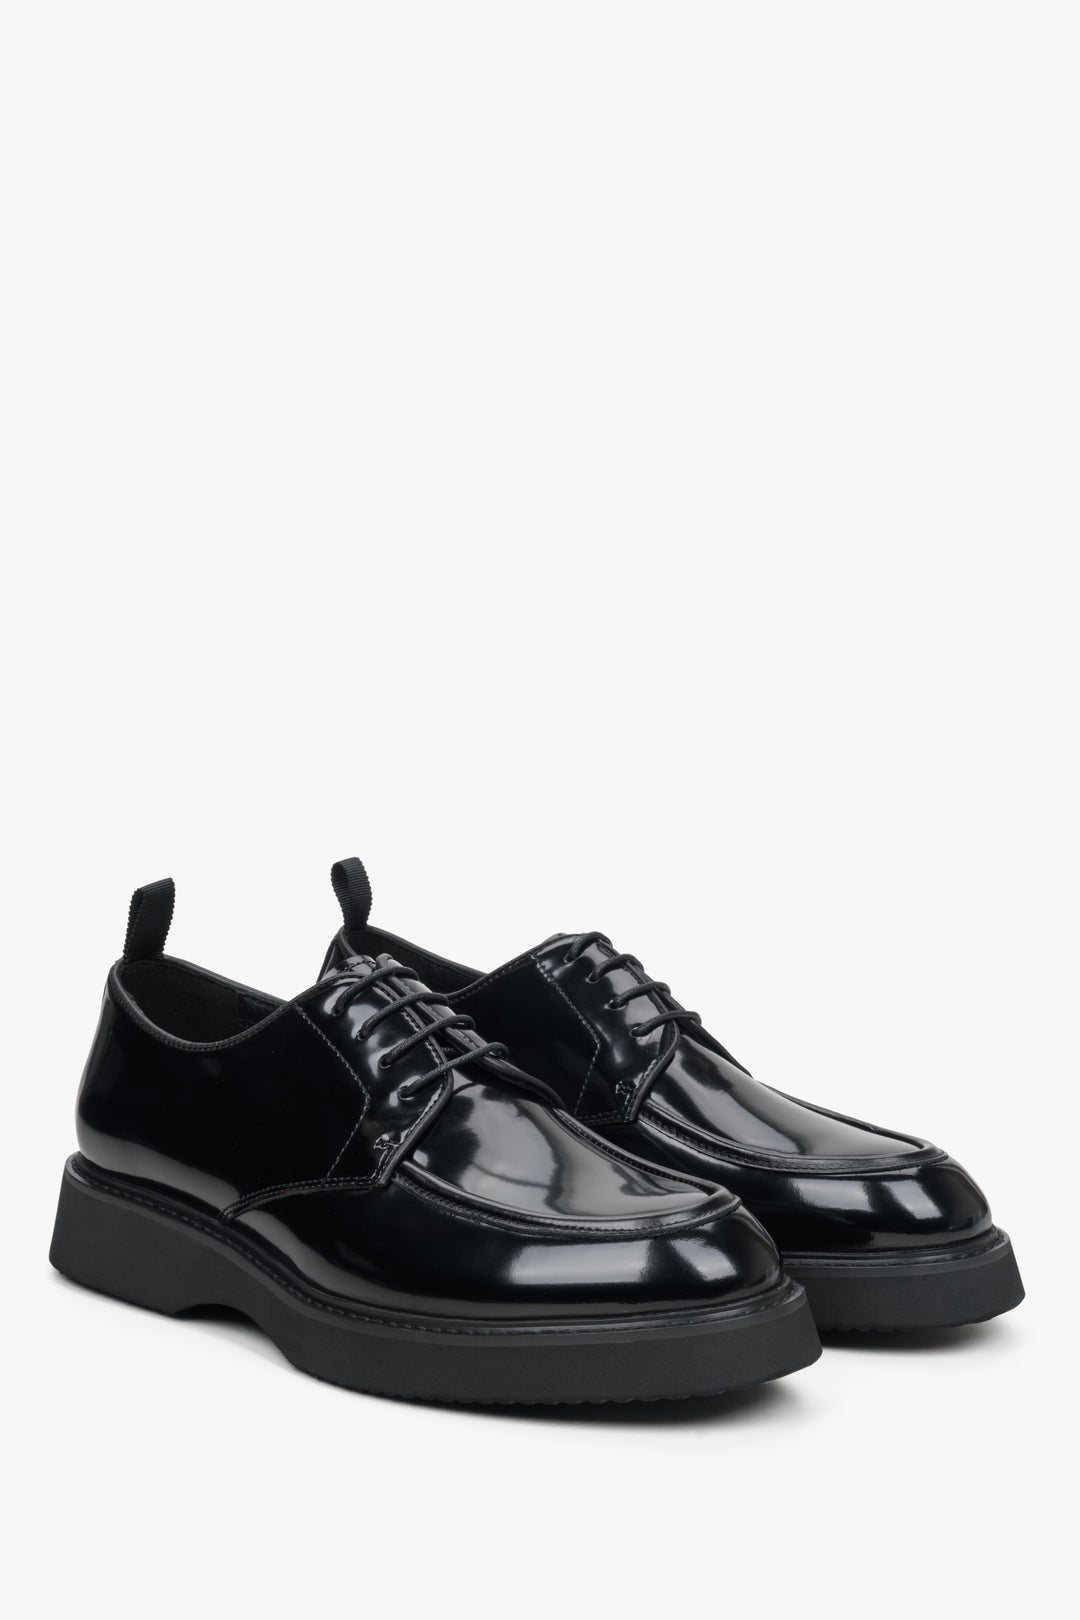 Men's black brogues made of patent leather by Estro.